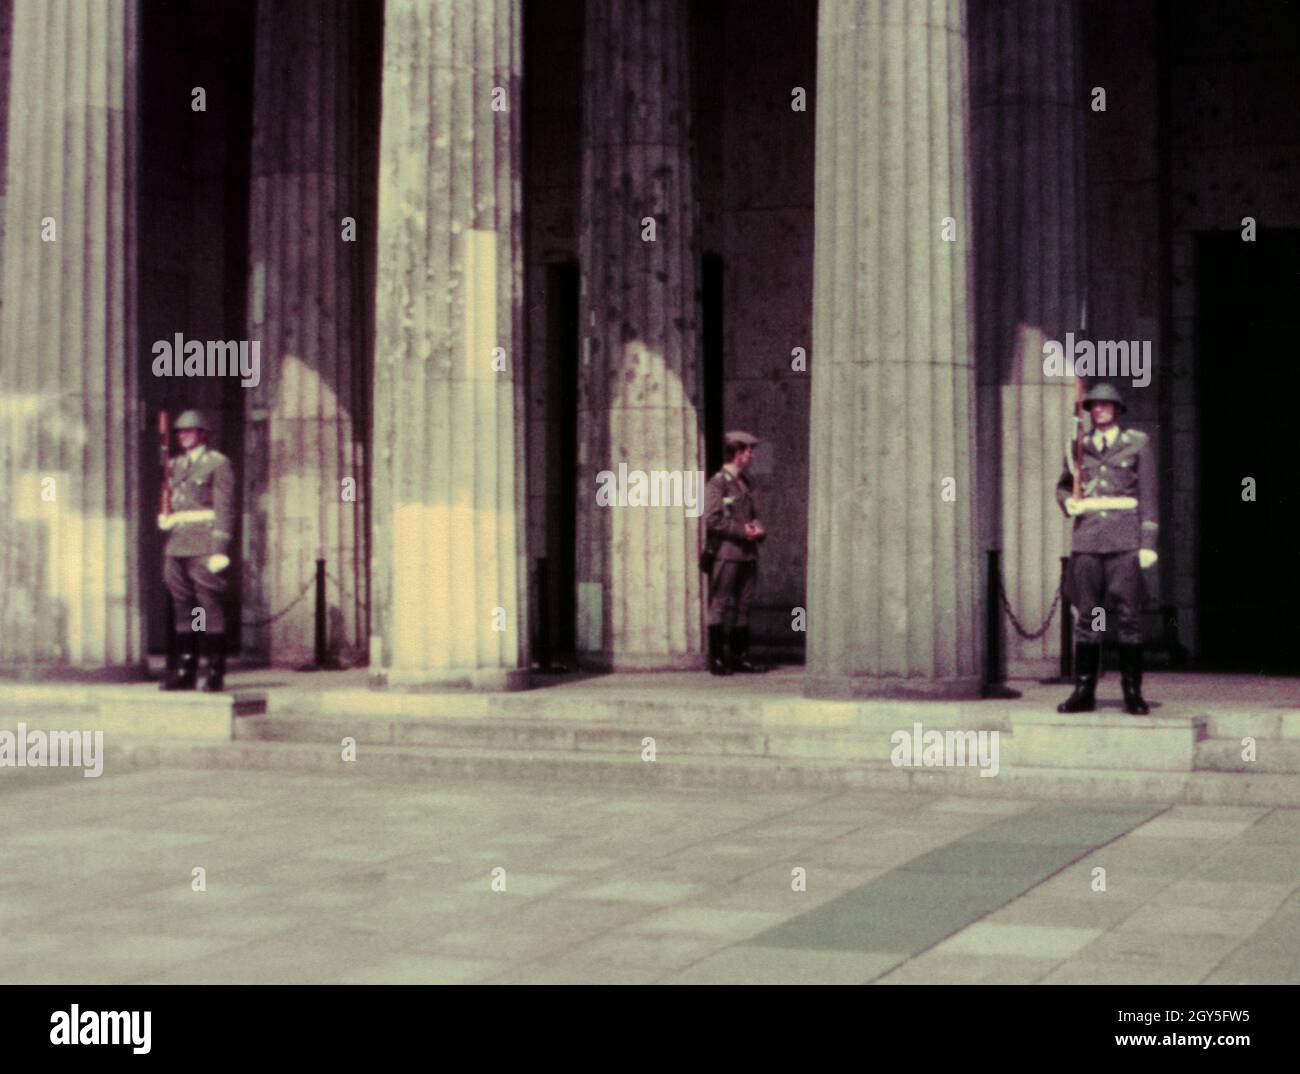 Armed guards on Ceremonial Duty, Berlin, East Germany,1982 Stock Photo